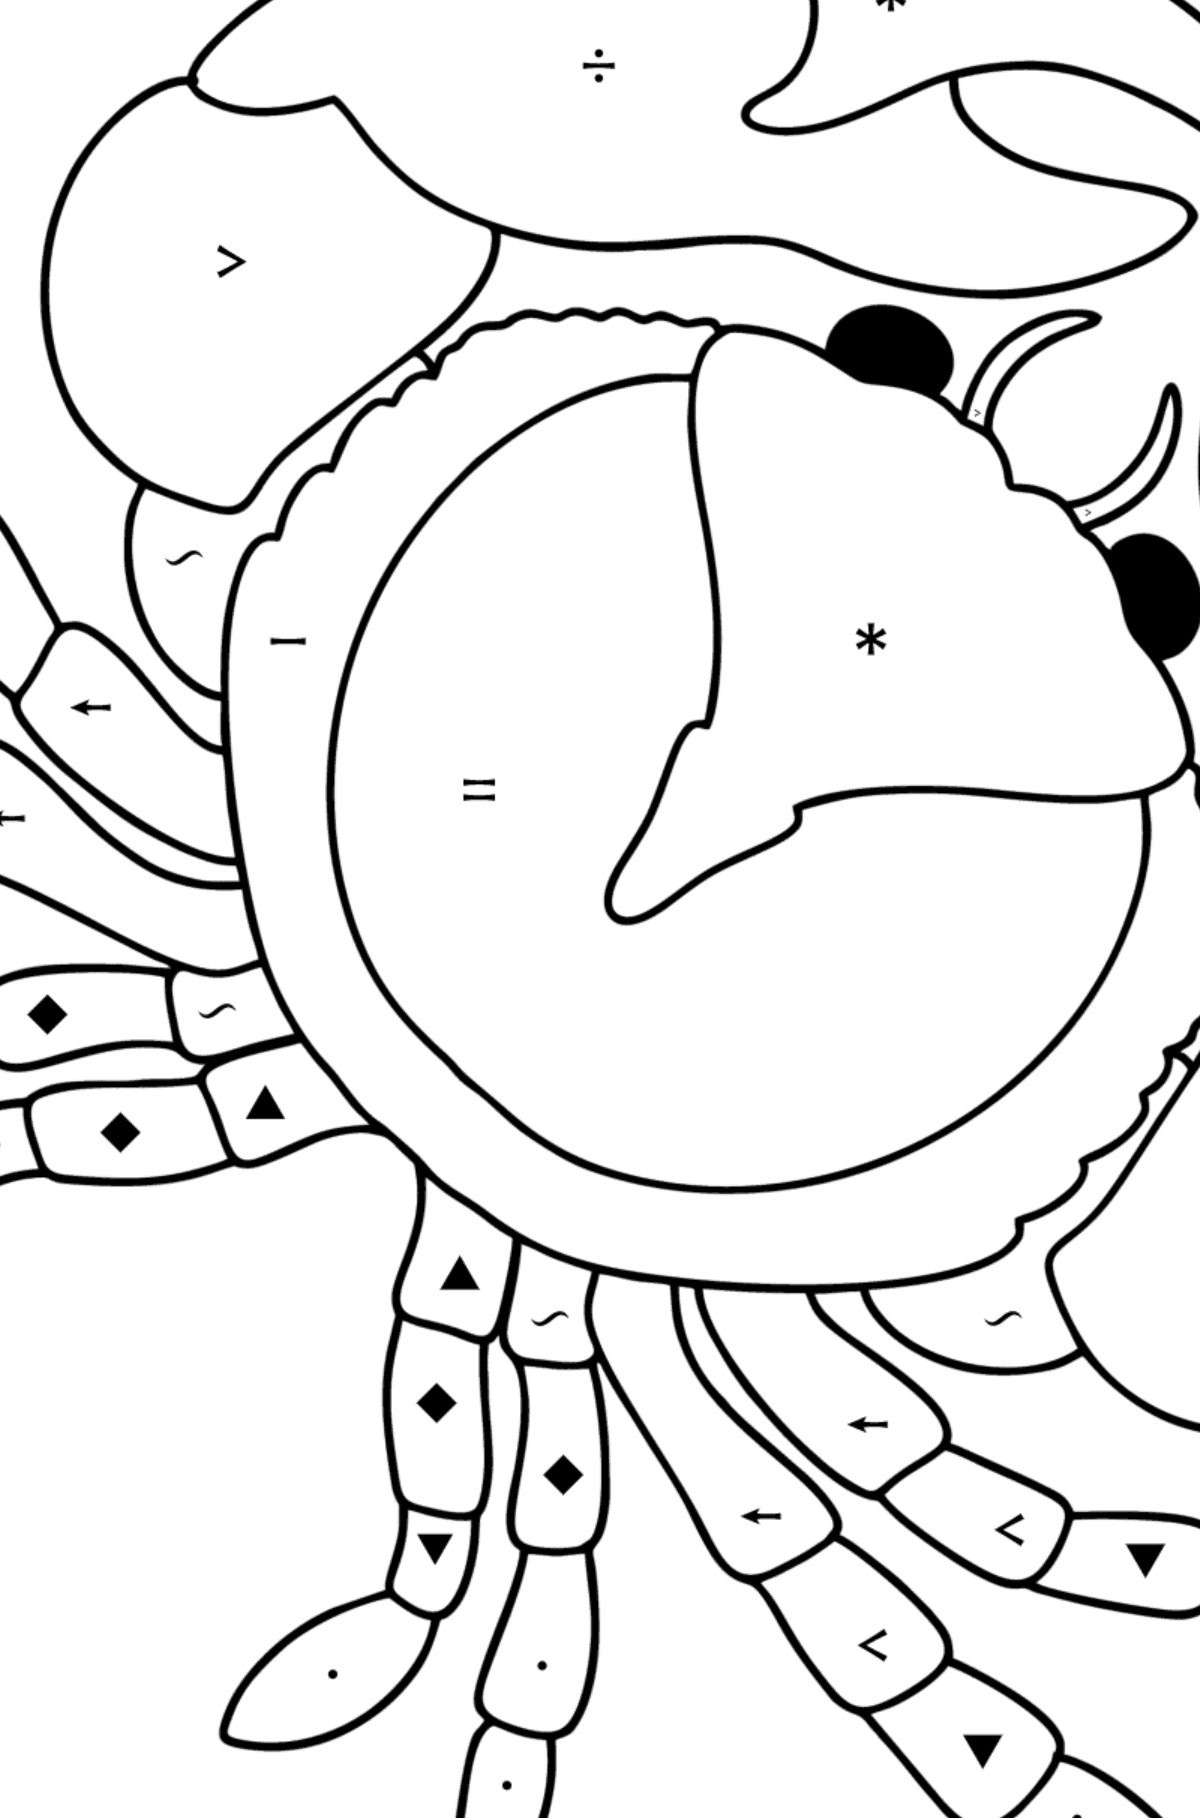 Sea ​​crab coloring page - Coloring by Symbols for Kids